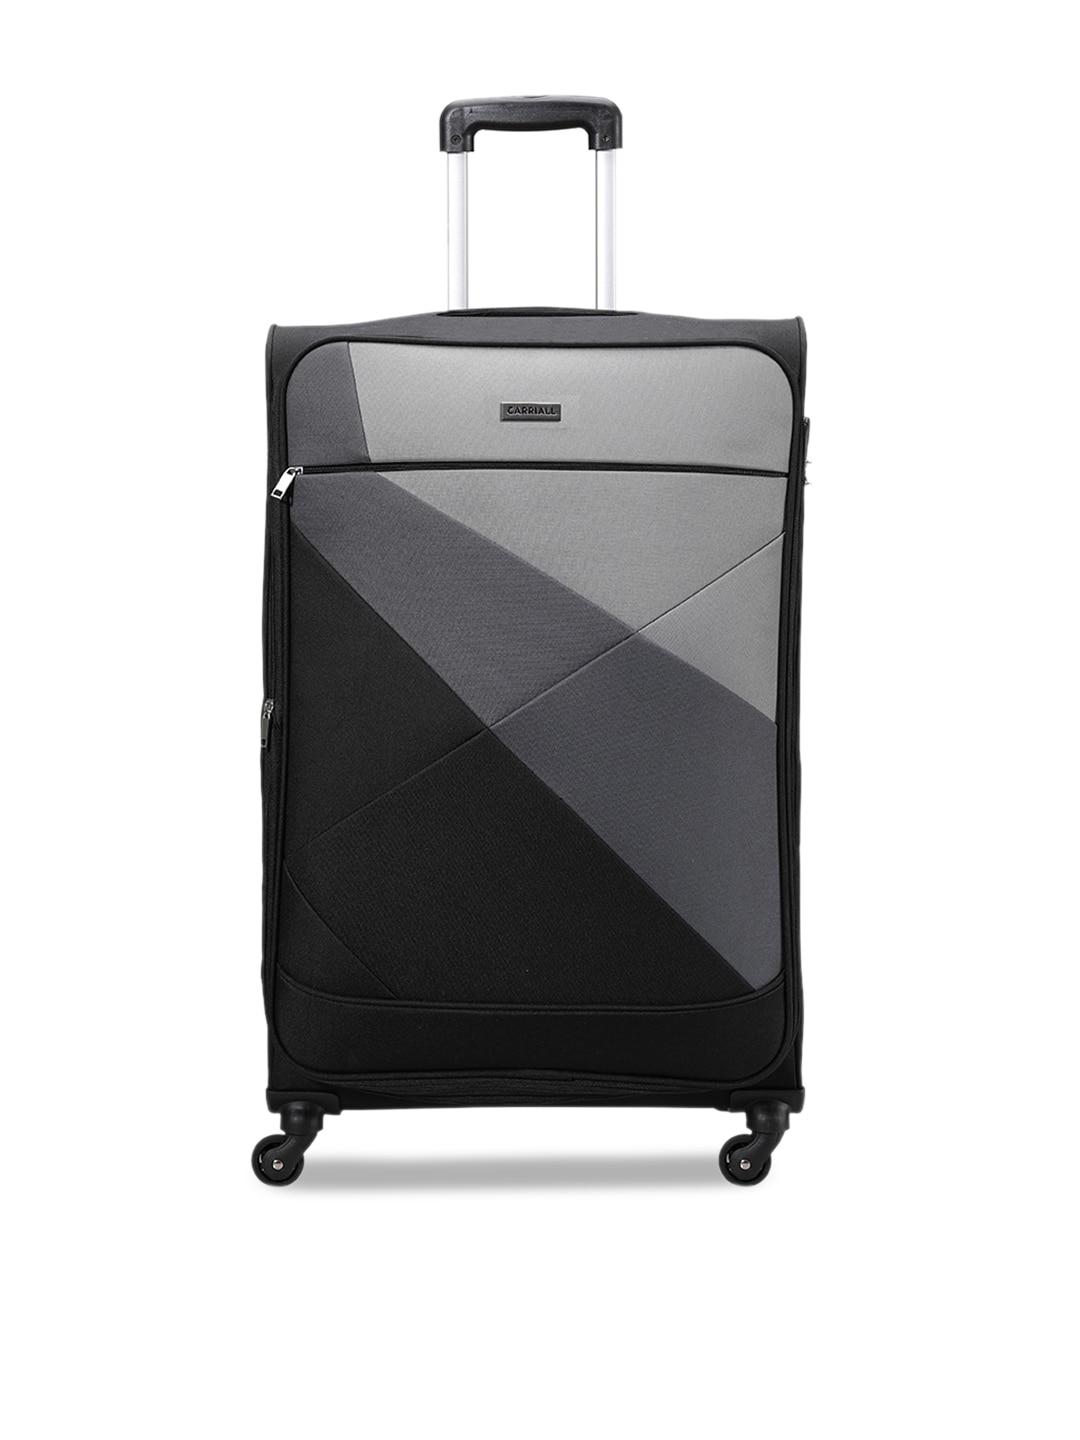 carriall black & grey colourblocked soft-sided large trolley suitcase